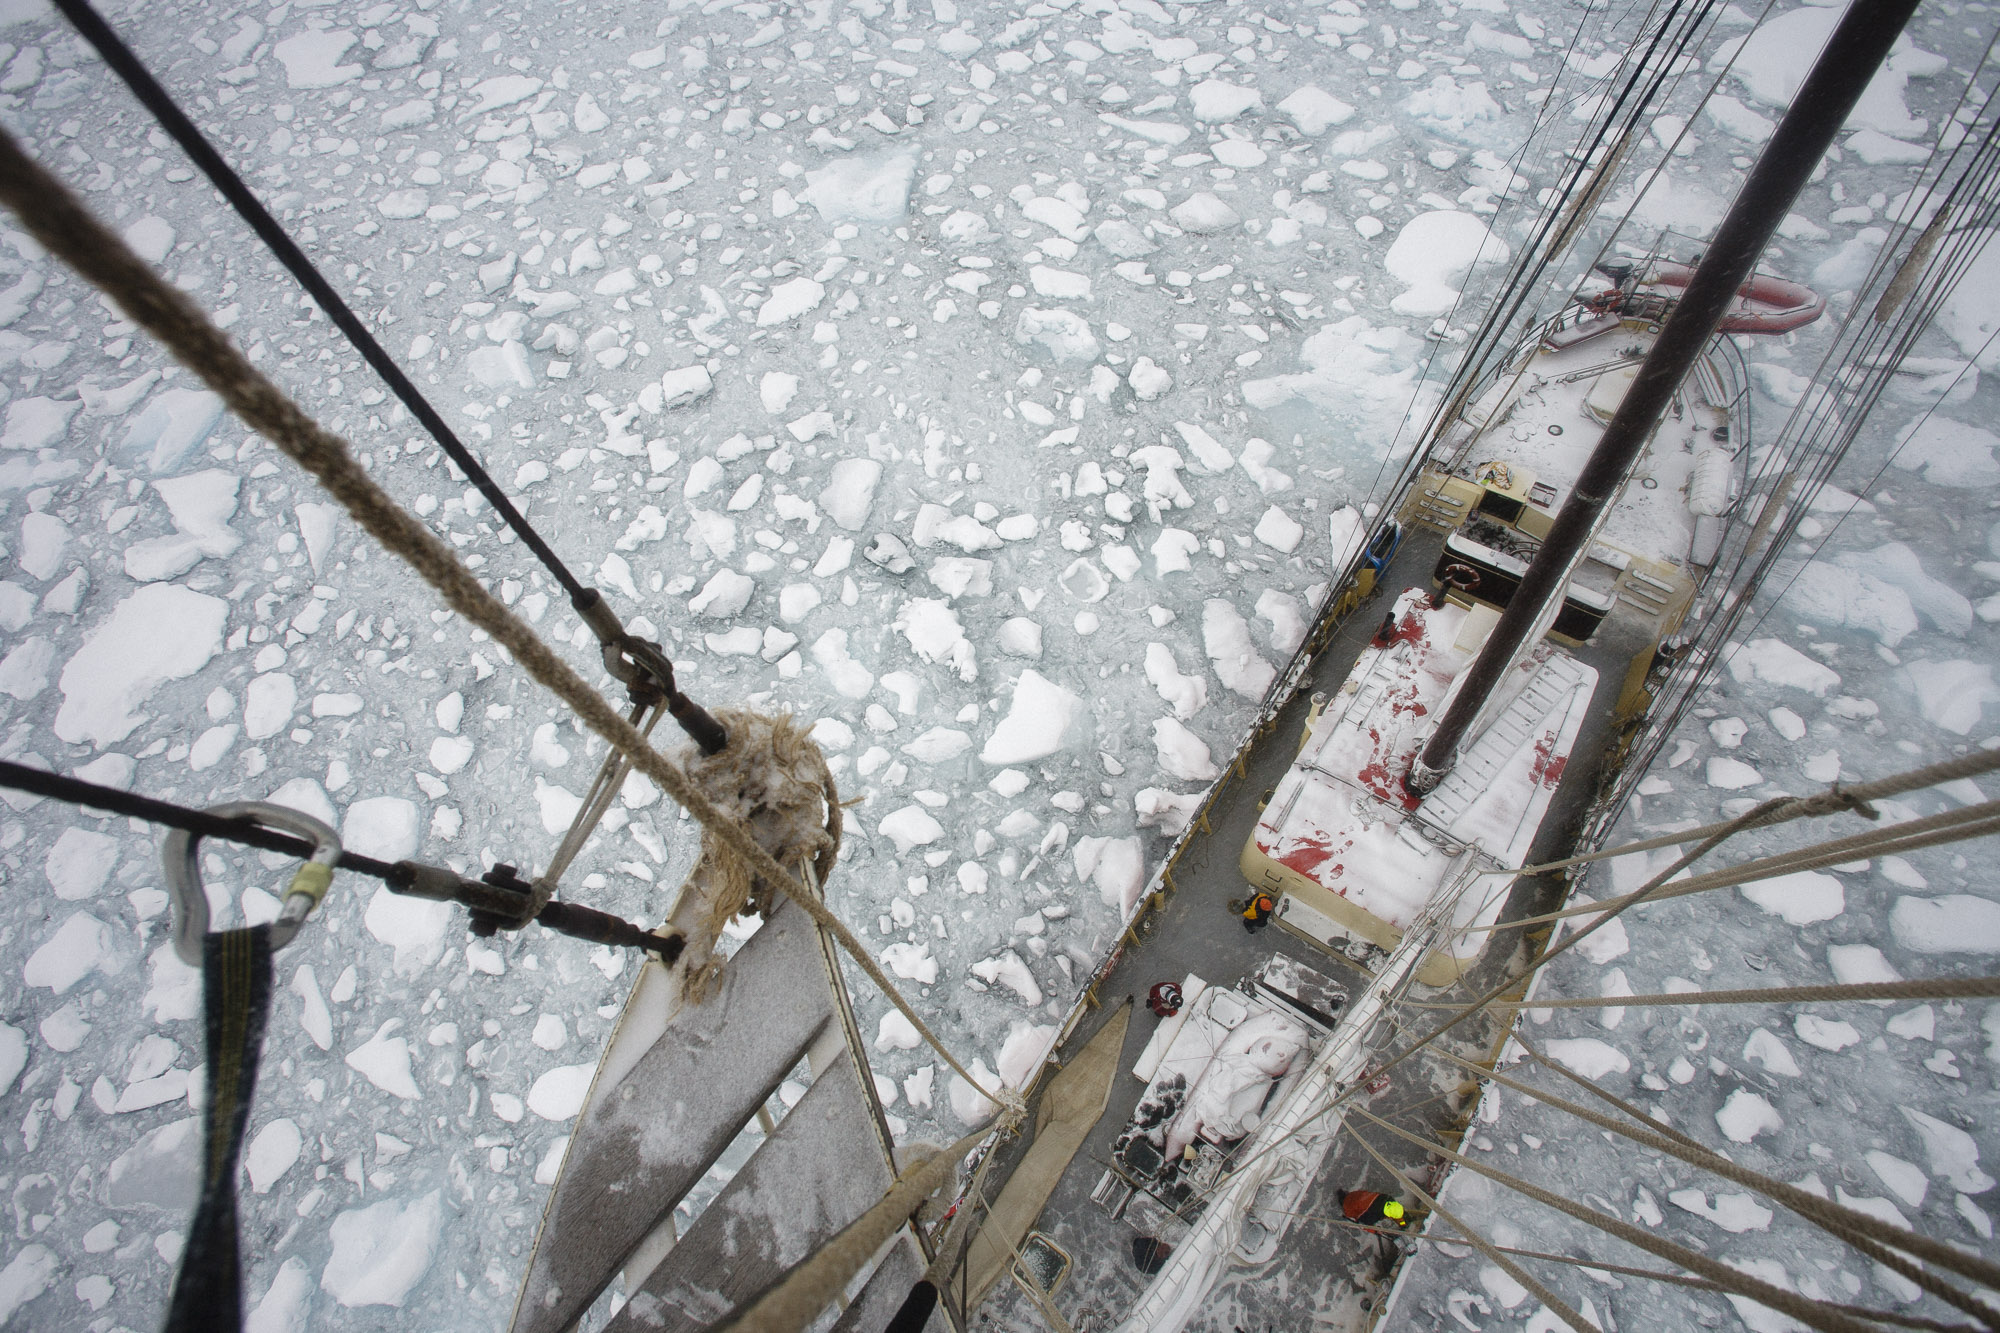 The frozen deck of ship viewed from the mast